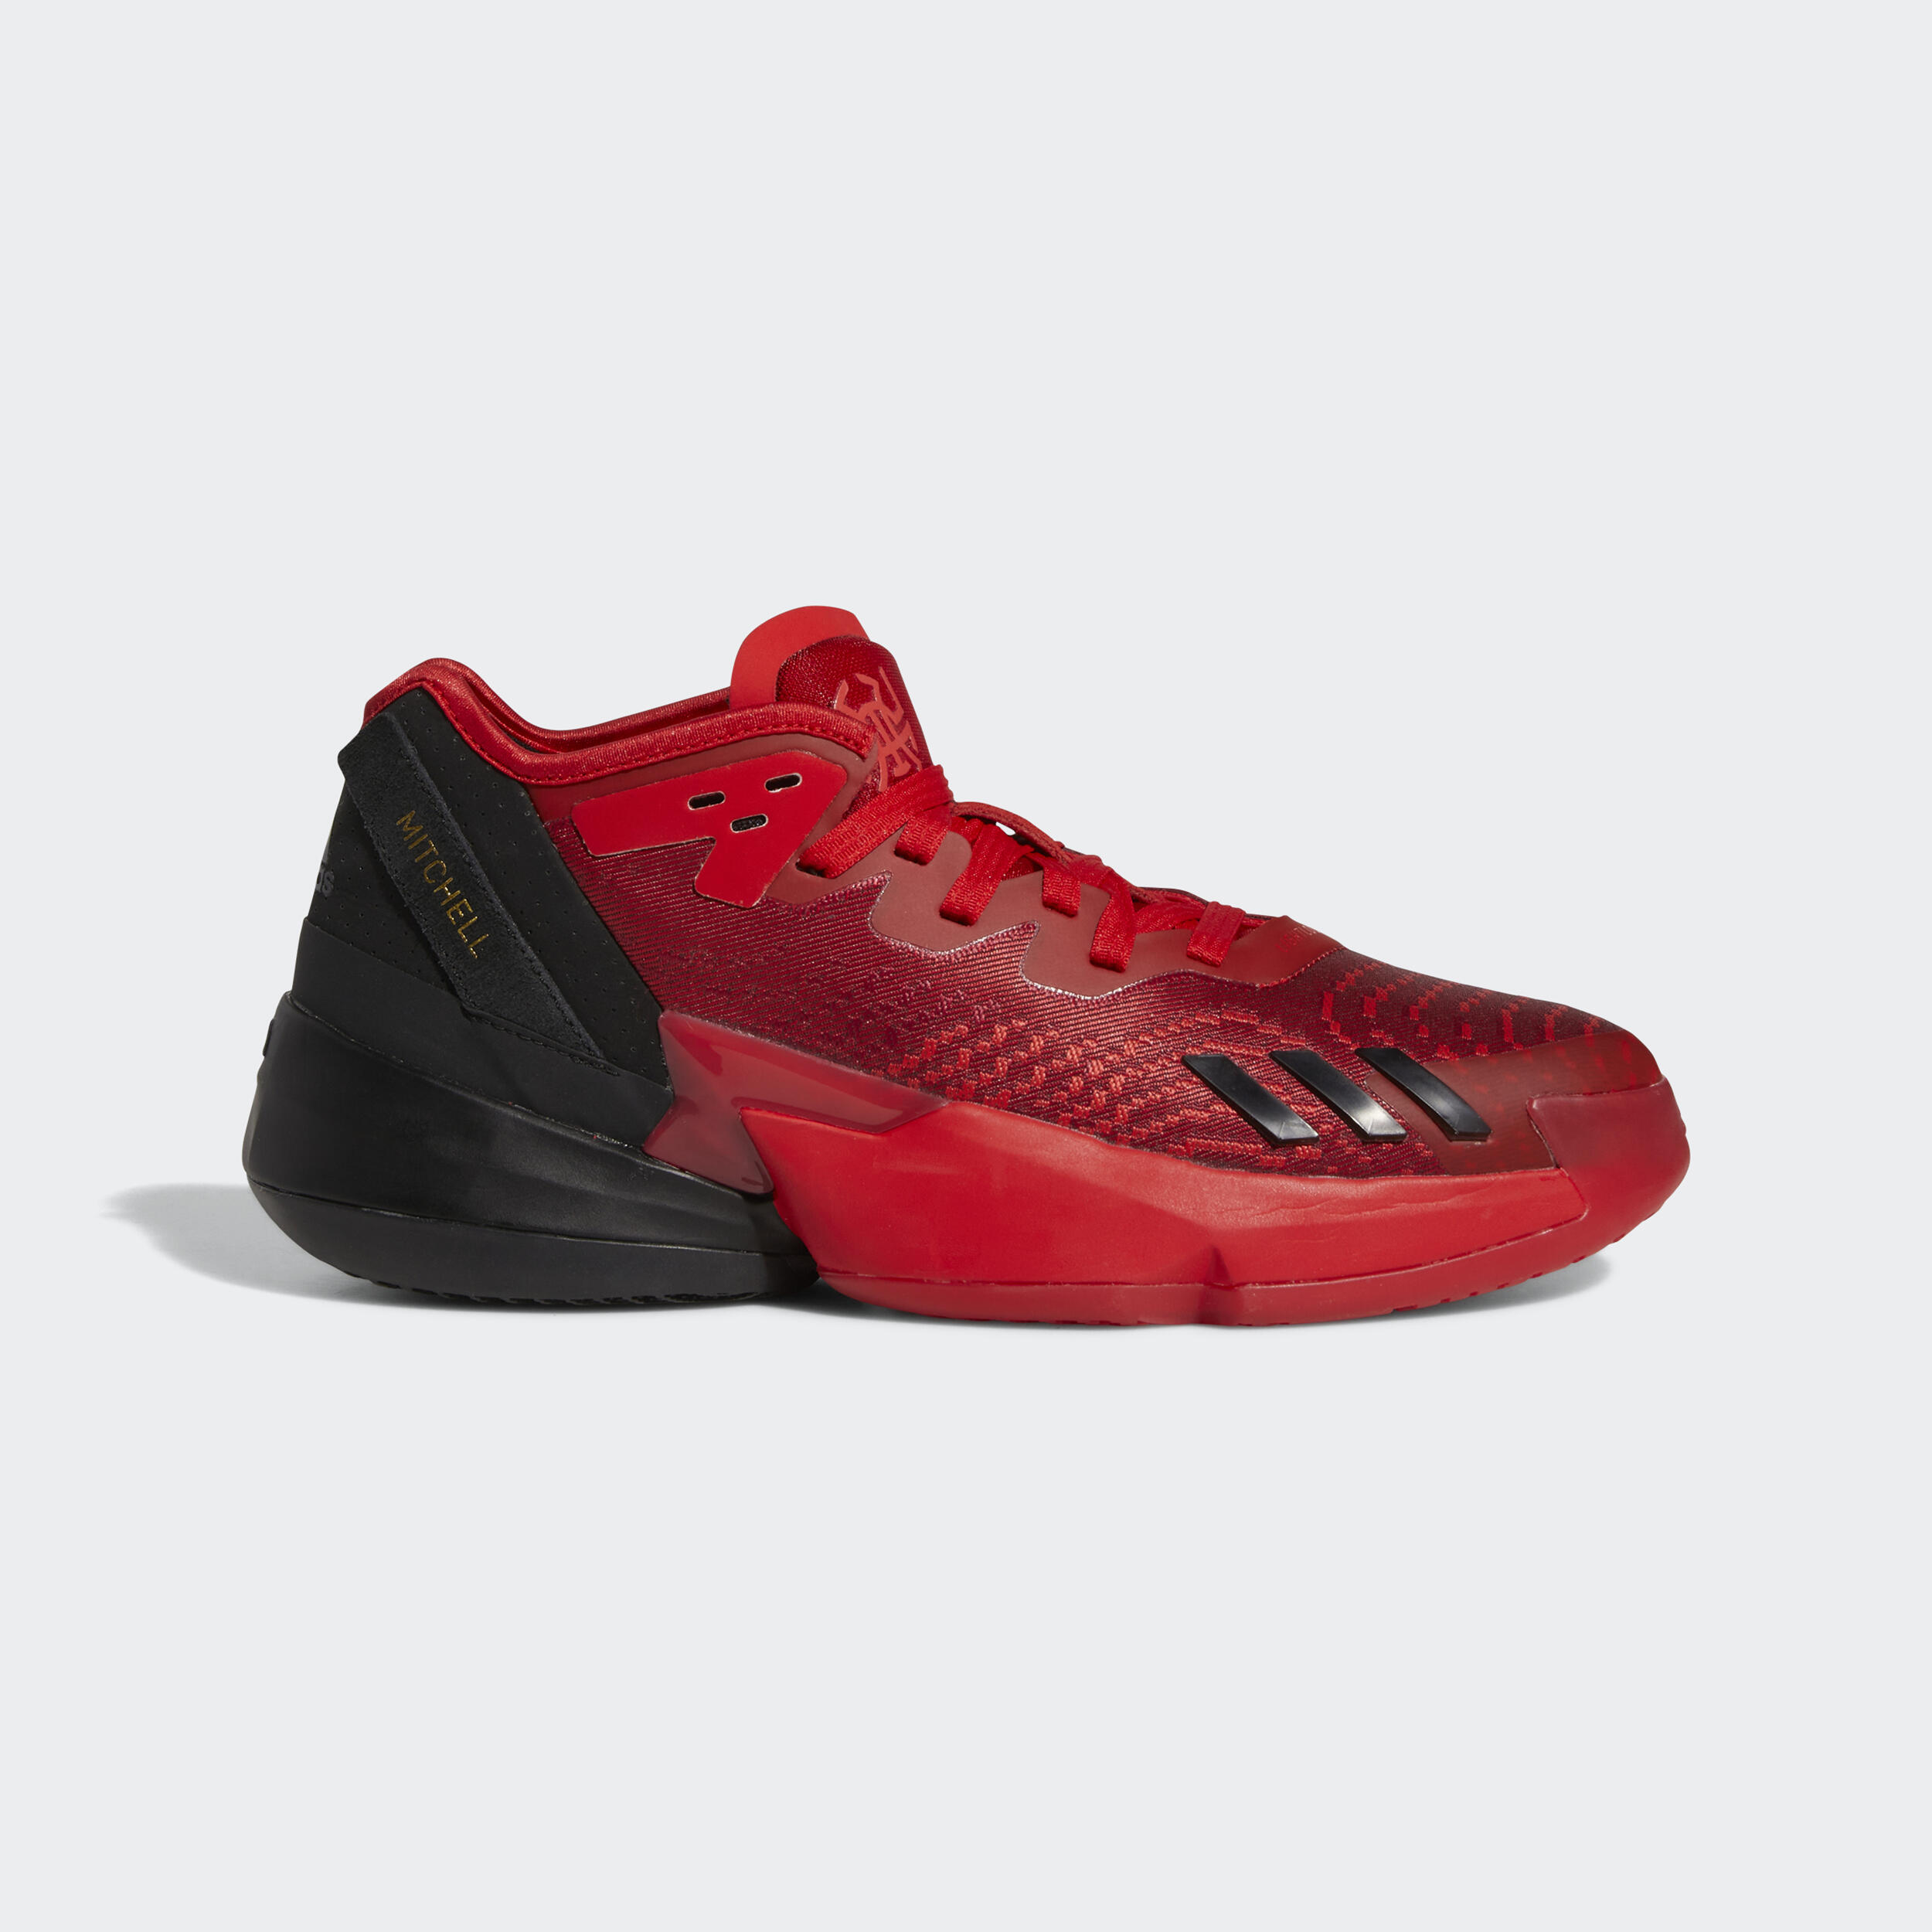 Men's Basketball Shoes D.O.N Issue 4 - Red/Black 1/4